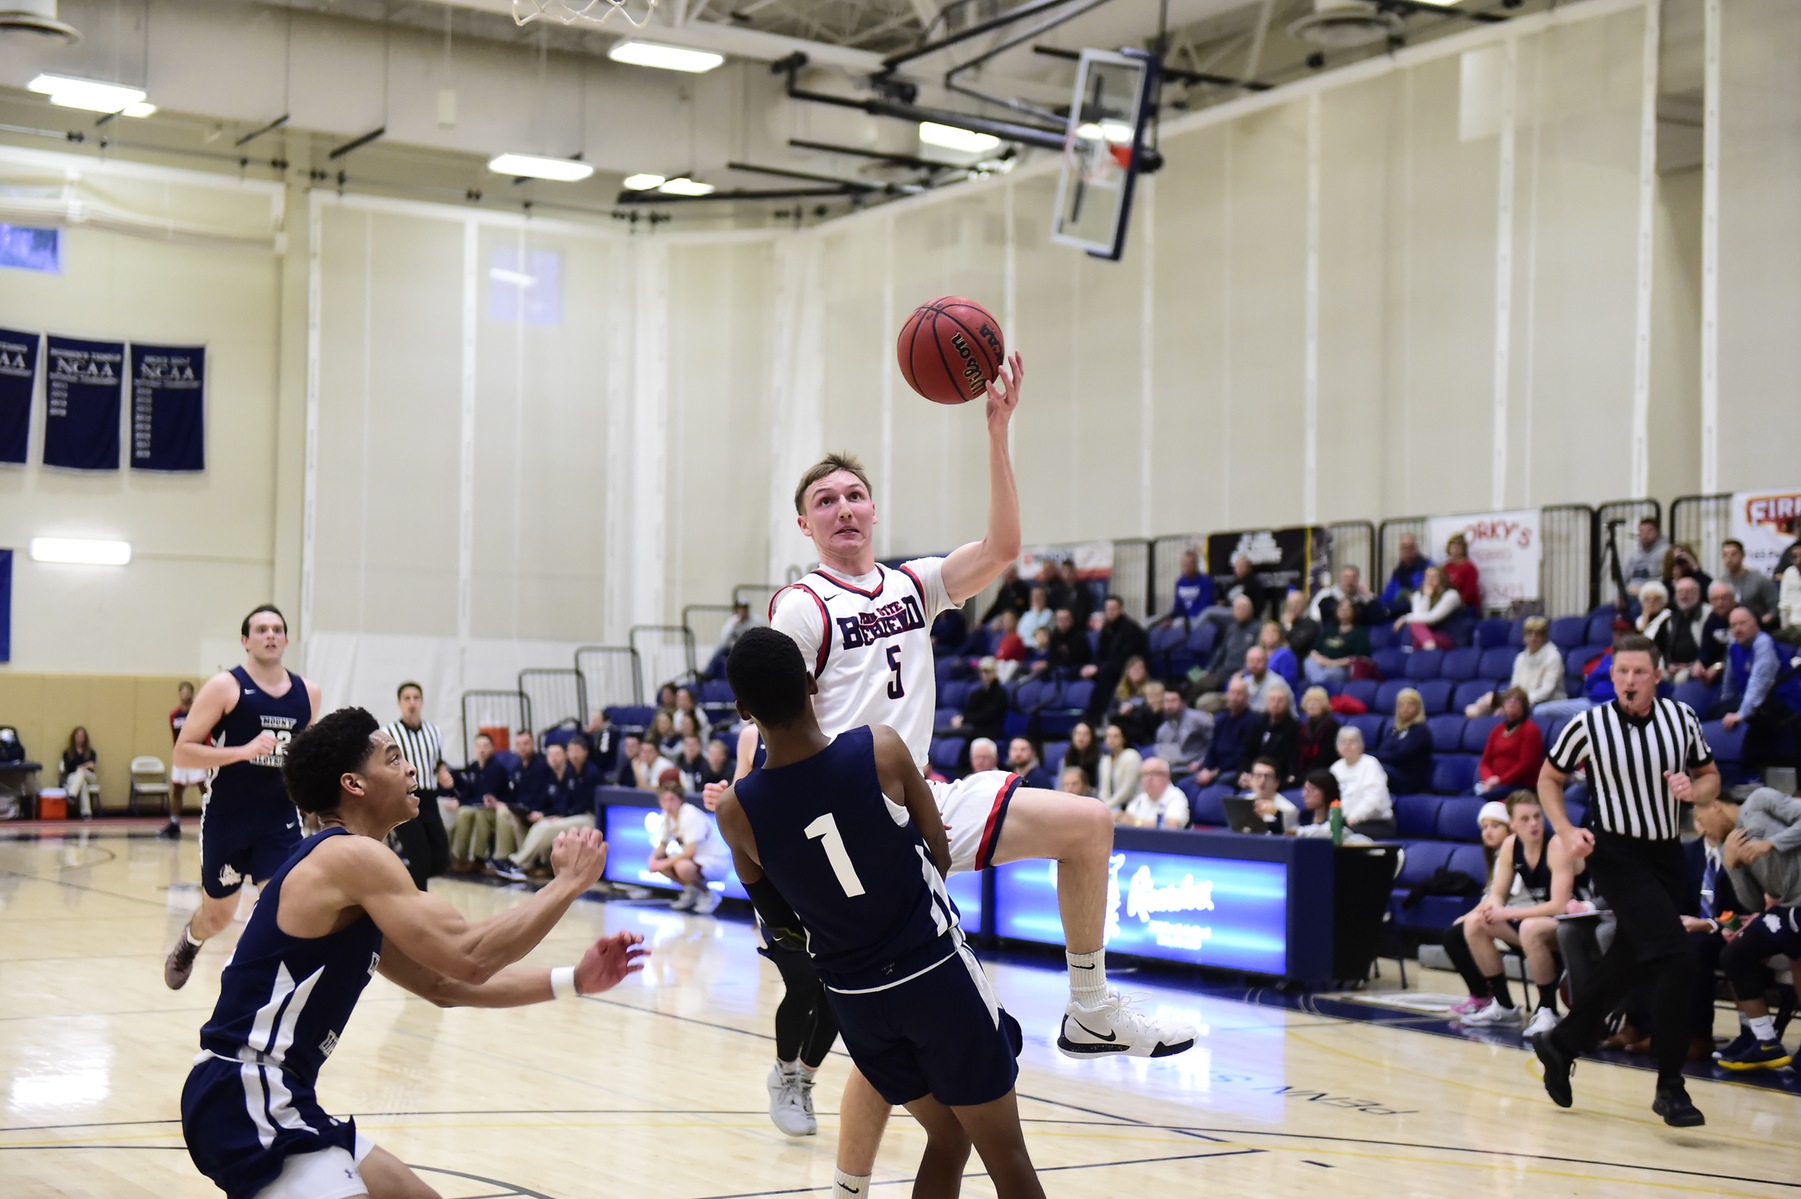 Career Night Lifts Men's Basketball Over Thiel